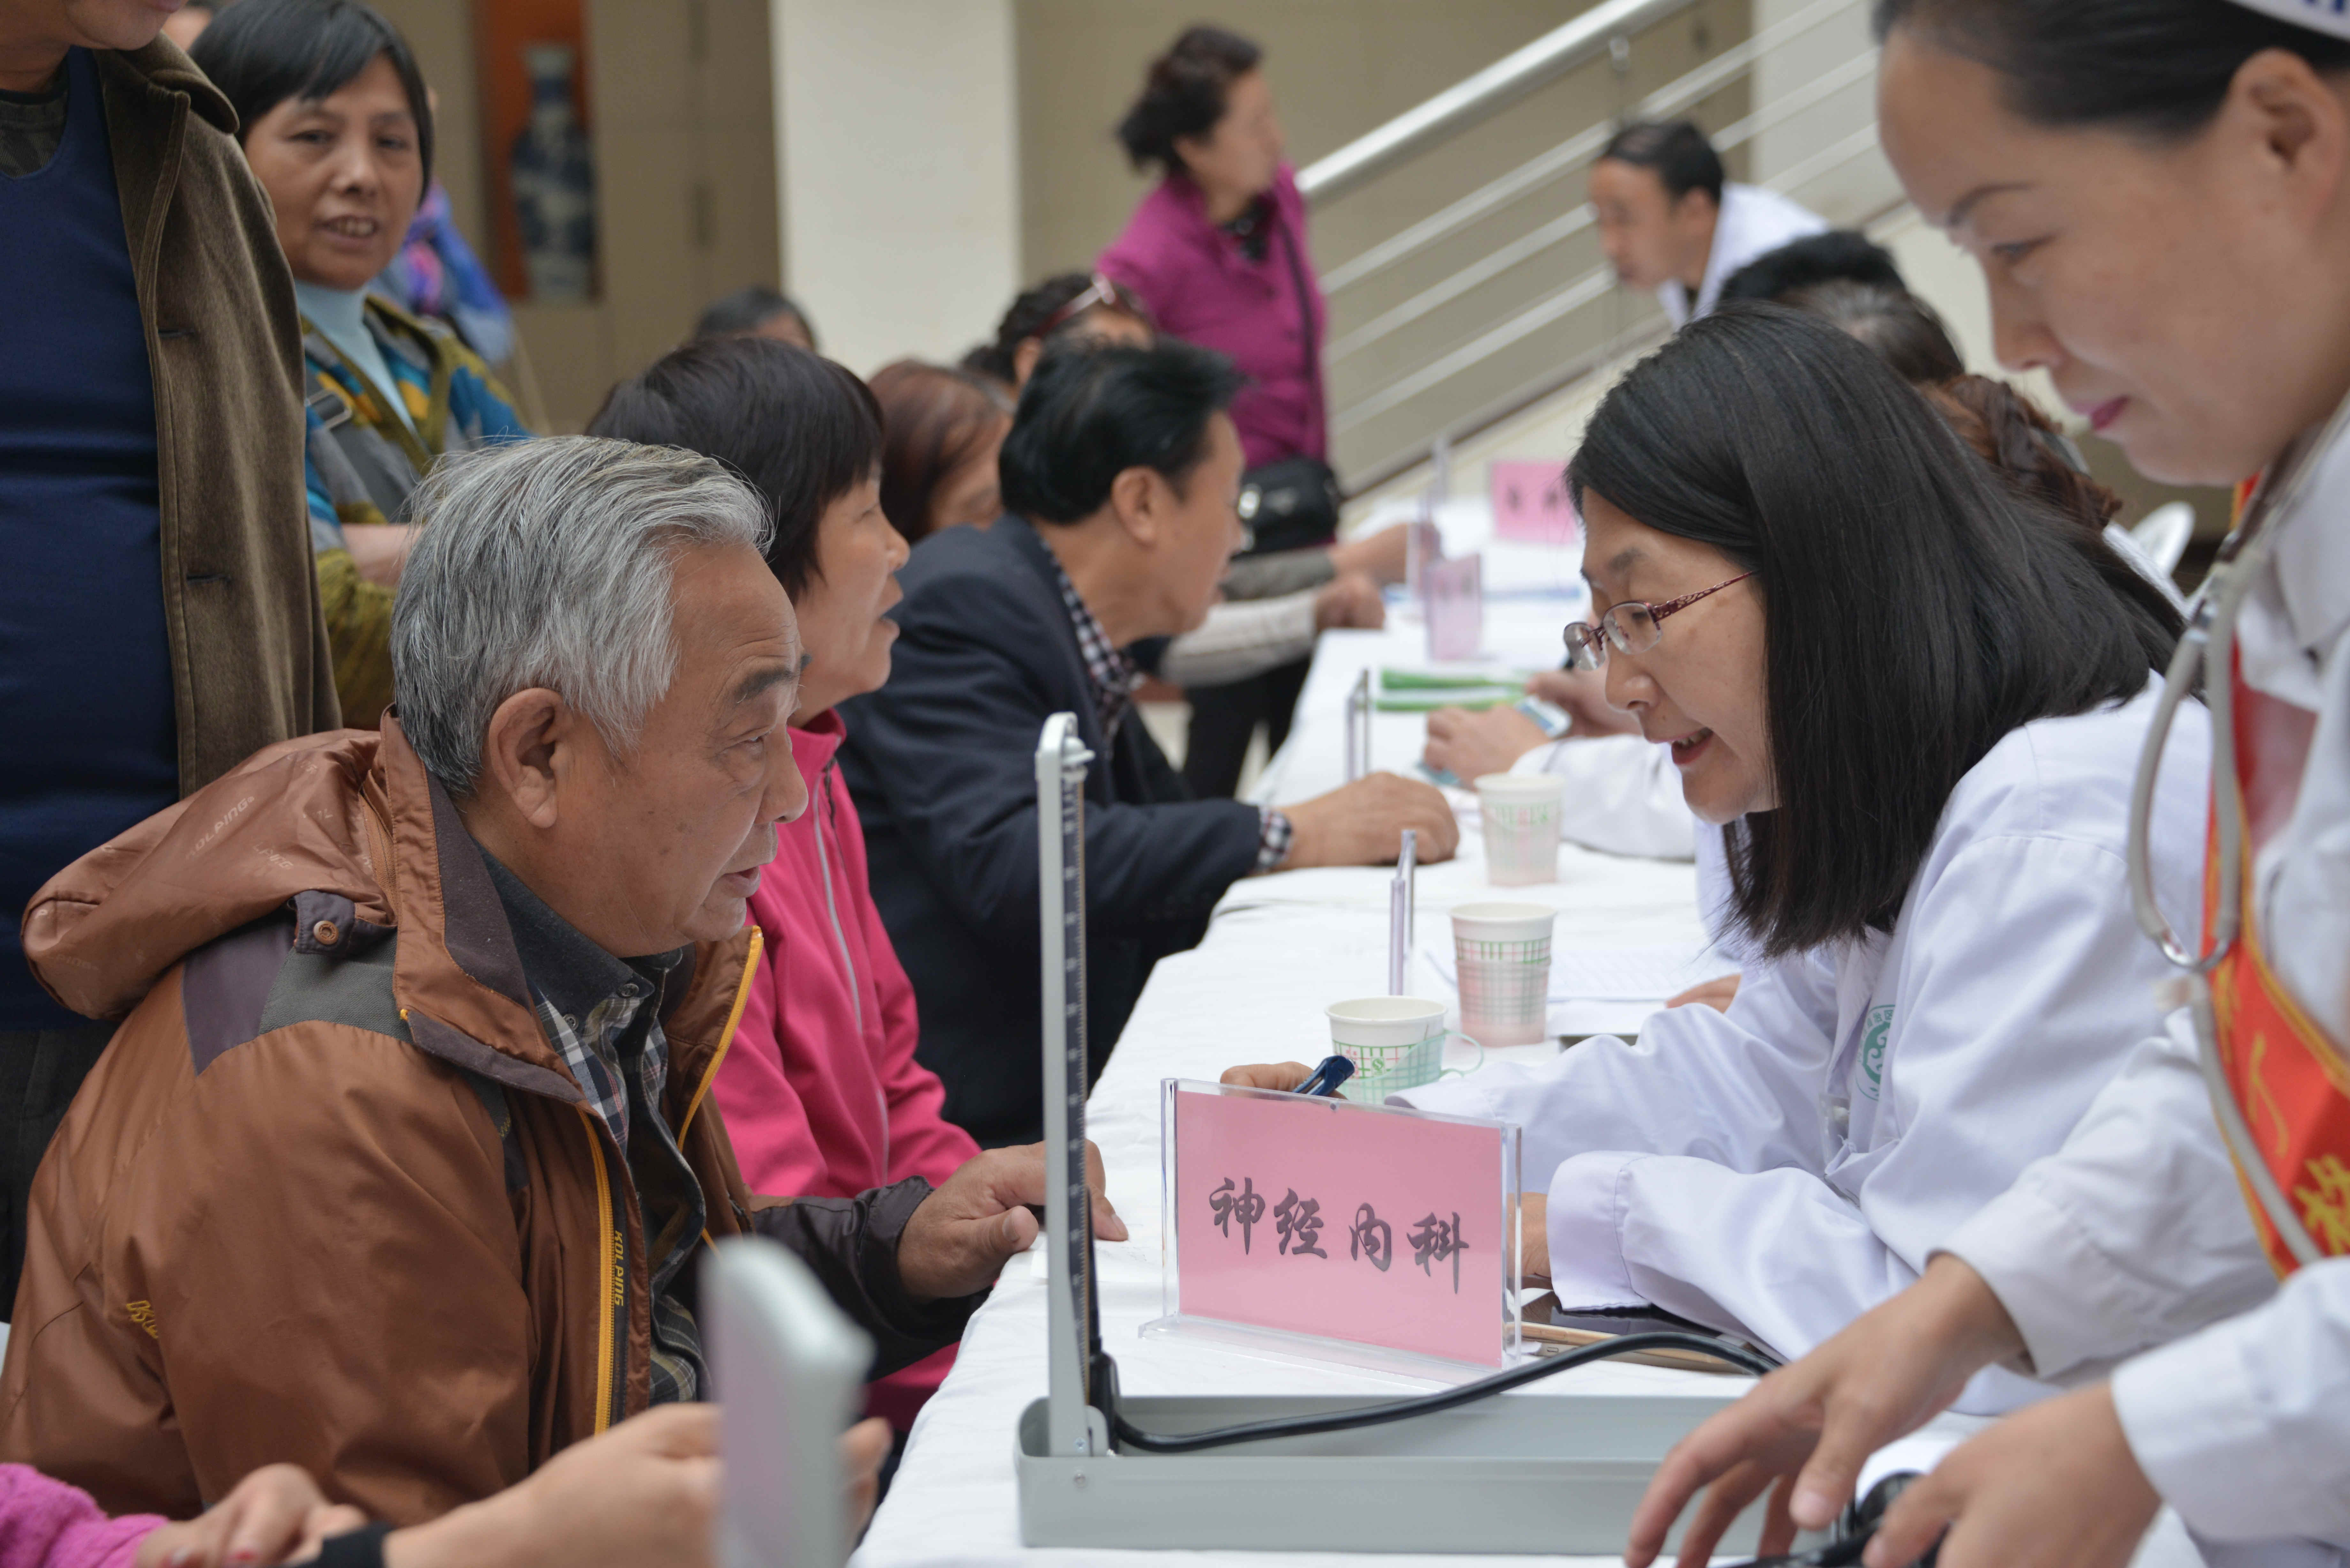 (151021) -- HUHHOT, Oct. 21, 2015 (Xinhua) -- Doctors from Inner Mongolia People's Hospital volunteered to provide medical consultation and physical examination for the seniors in Huhhot, capital of north China's Inner Mongolia Autonomous Region, Oct. 21, 2015. China marks Chongyang Festival, China's day for the elderly, on Wednesday and people express their respects to the elderly through various ways. (Xinhua/Wang Jing) (wsw)